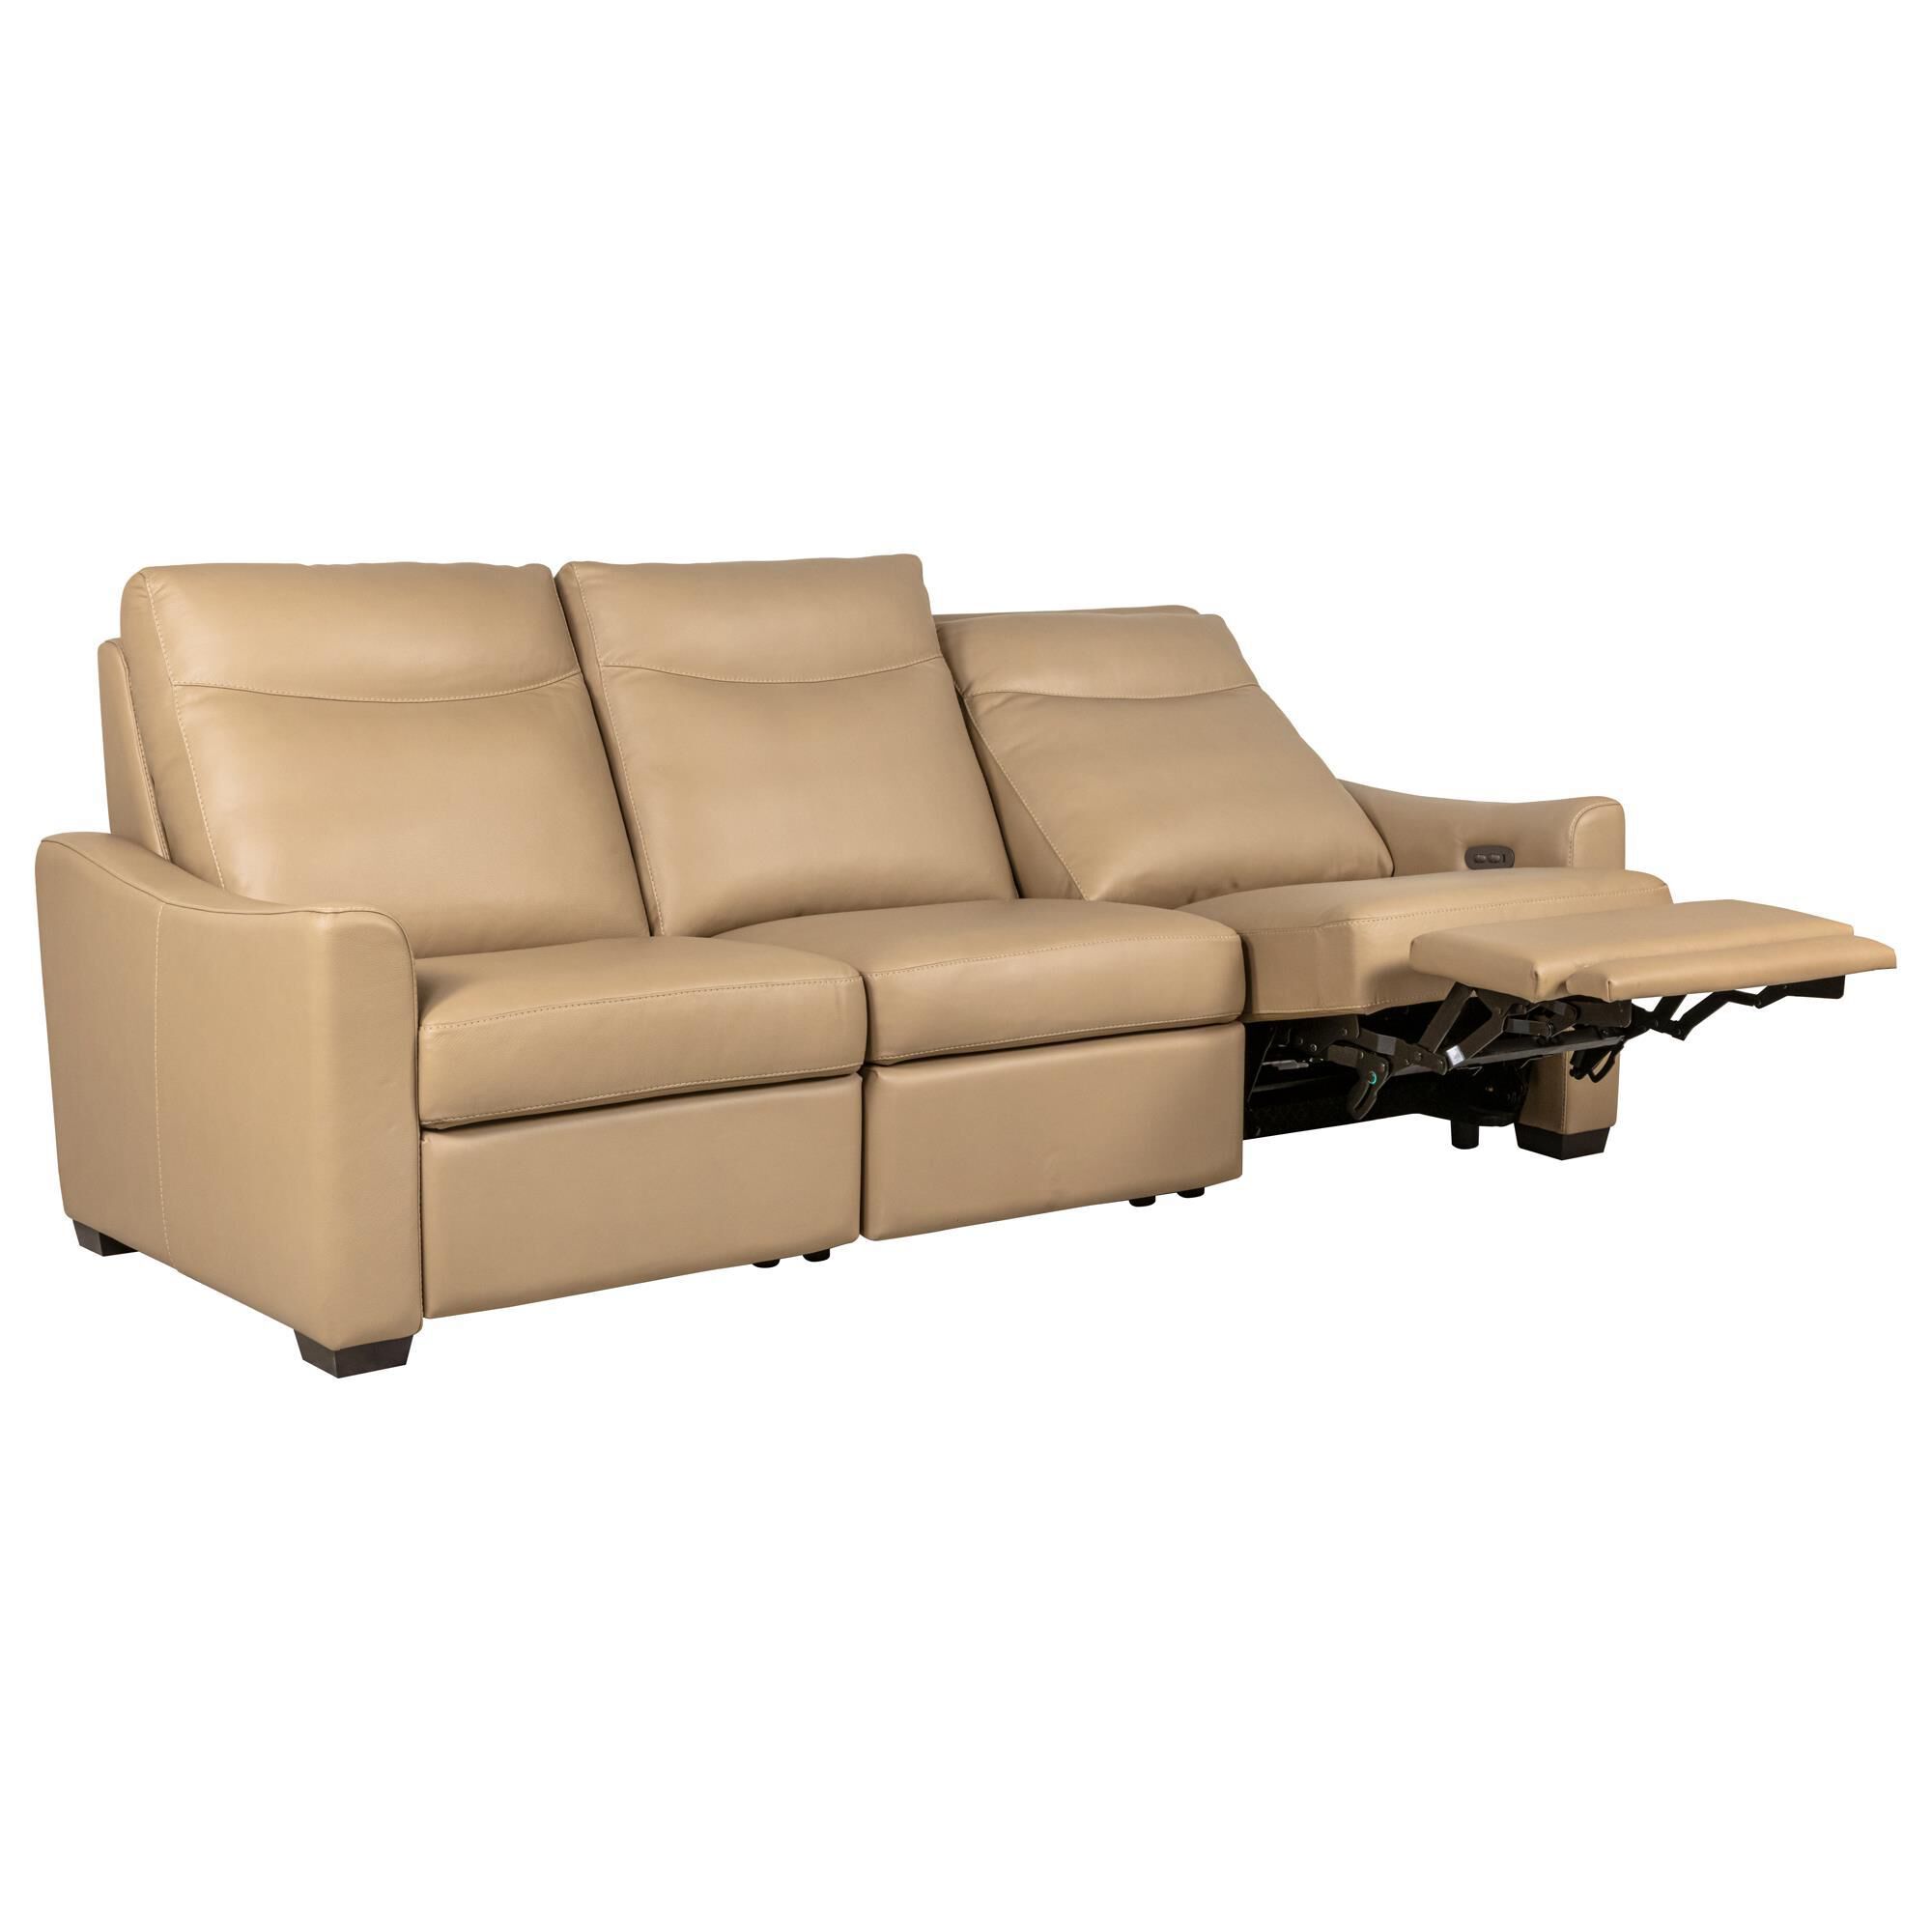 American Leather Carolina 3-Piece Power Reclining Sofa in Bison Champagne |  Shop NFM